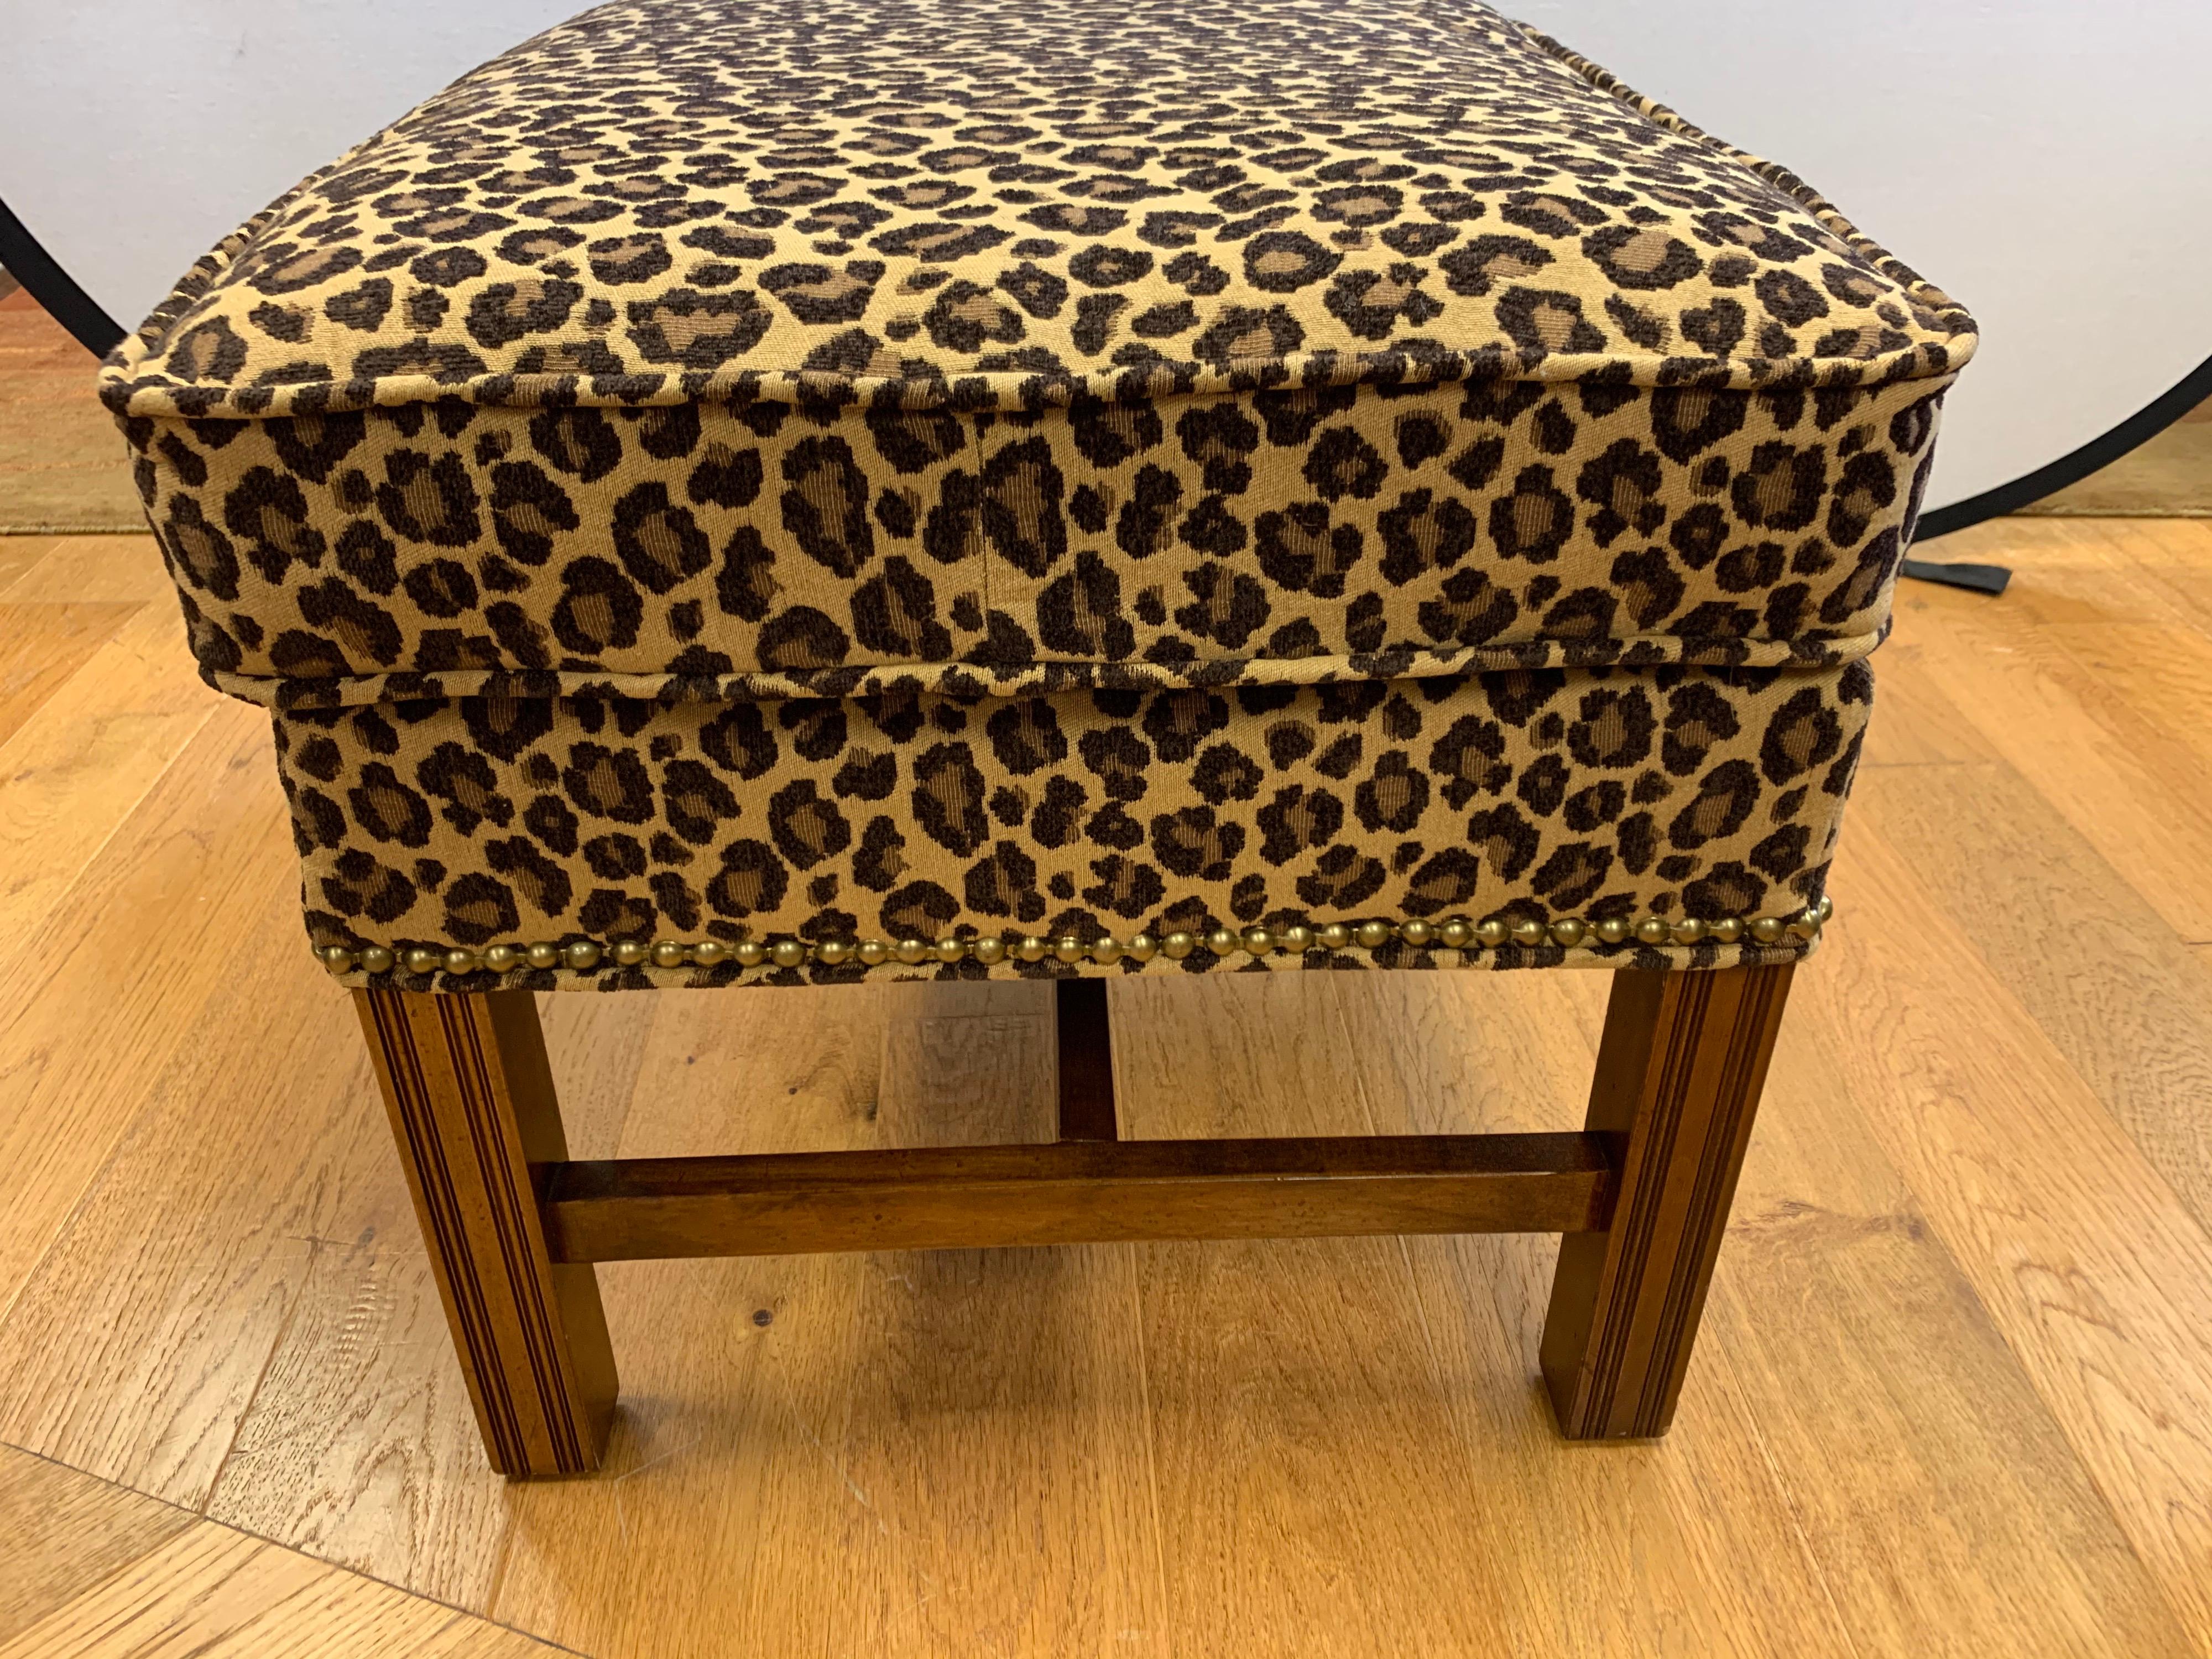 Brass Pair of Berhardt Leopard Print Ottomans Stools Nailhead Newly Upholstered